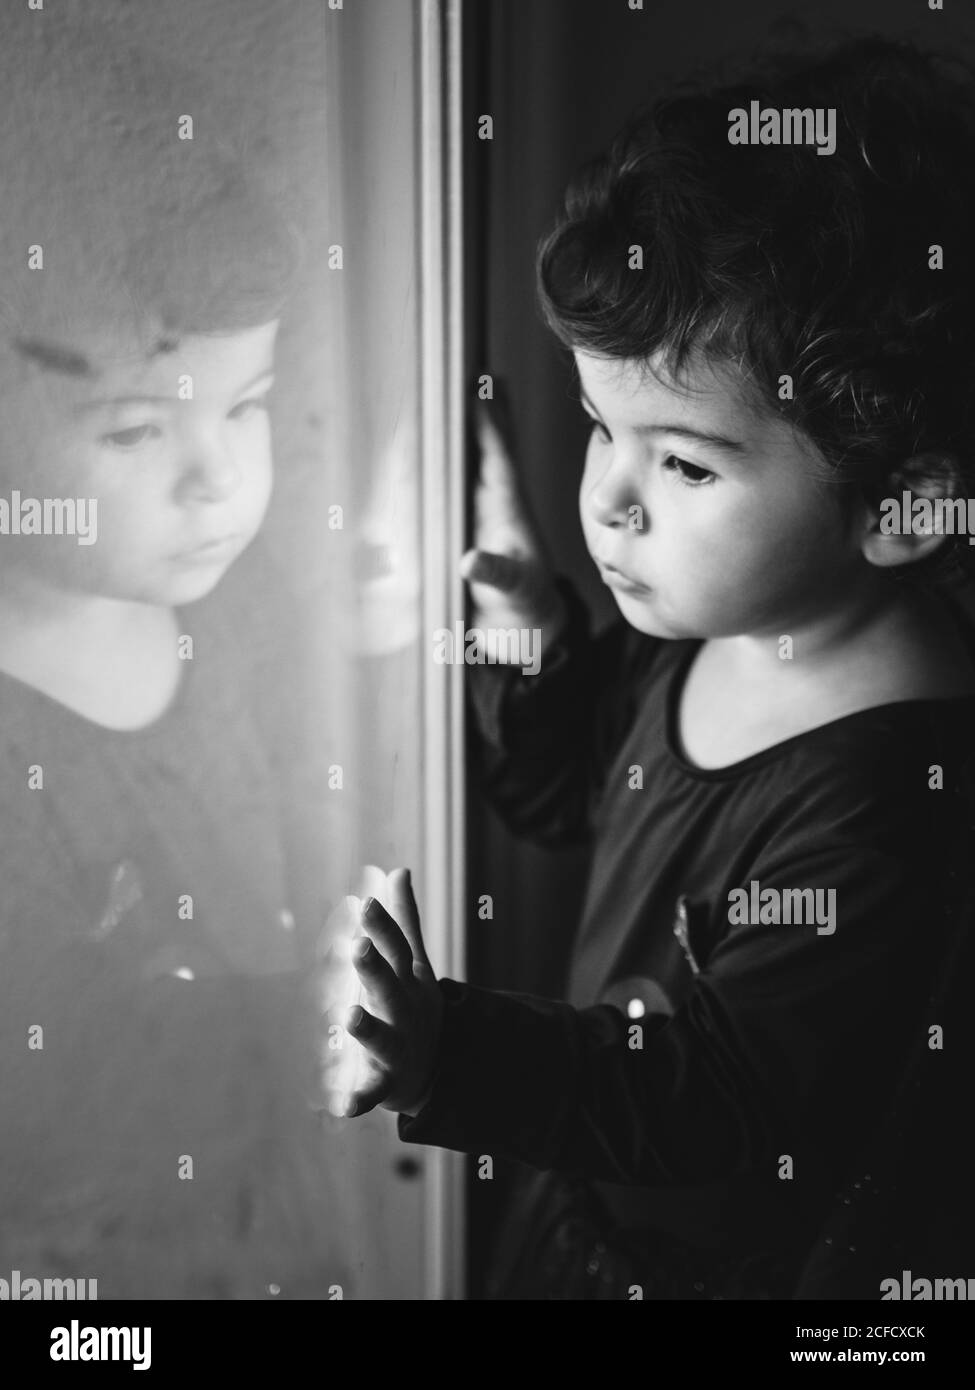 black and white portrait of a pensive little boy touching a window with a reflection of himself on it Stock Photo